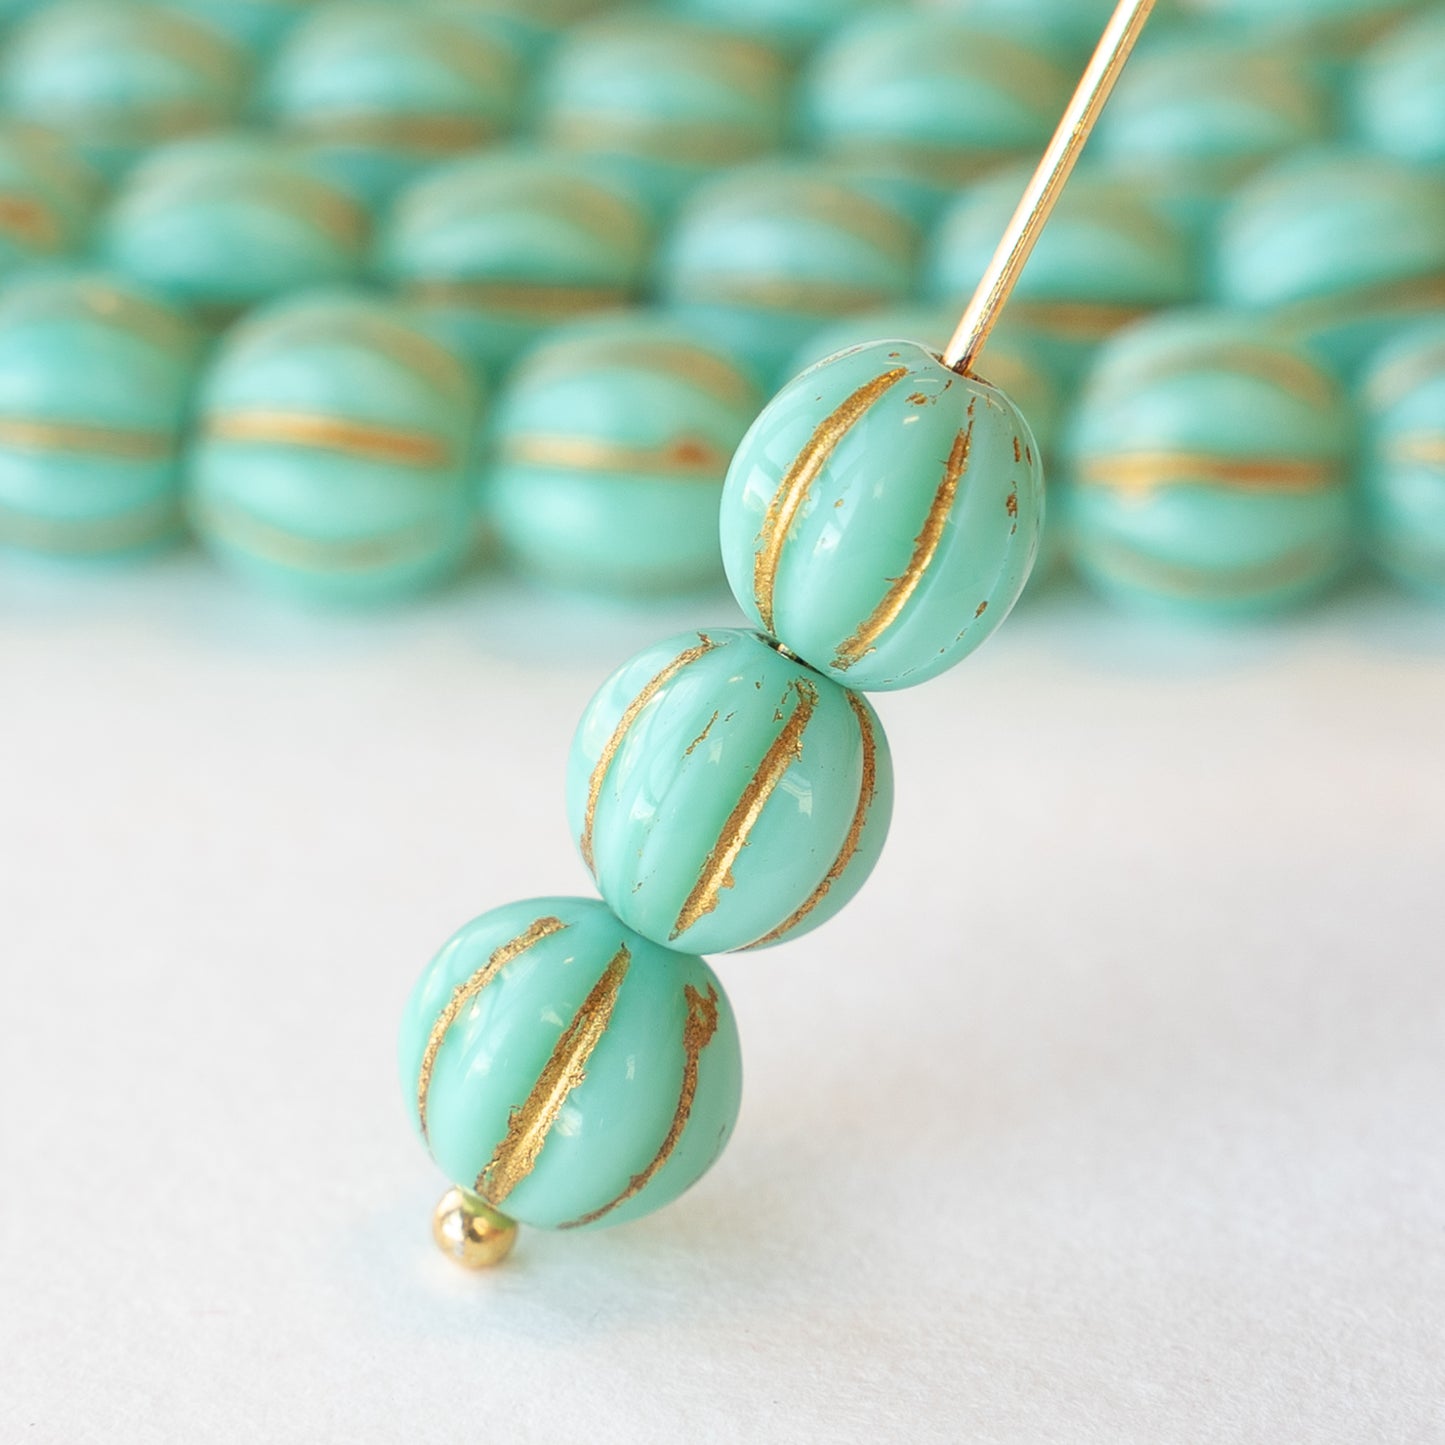 6mm Melon Beads - Light Turquoise with Gold Wash - 20 Beads